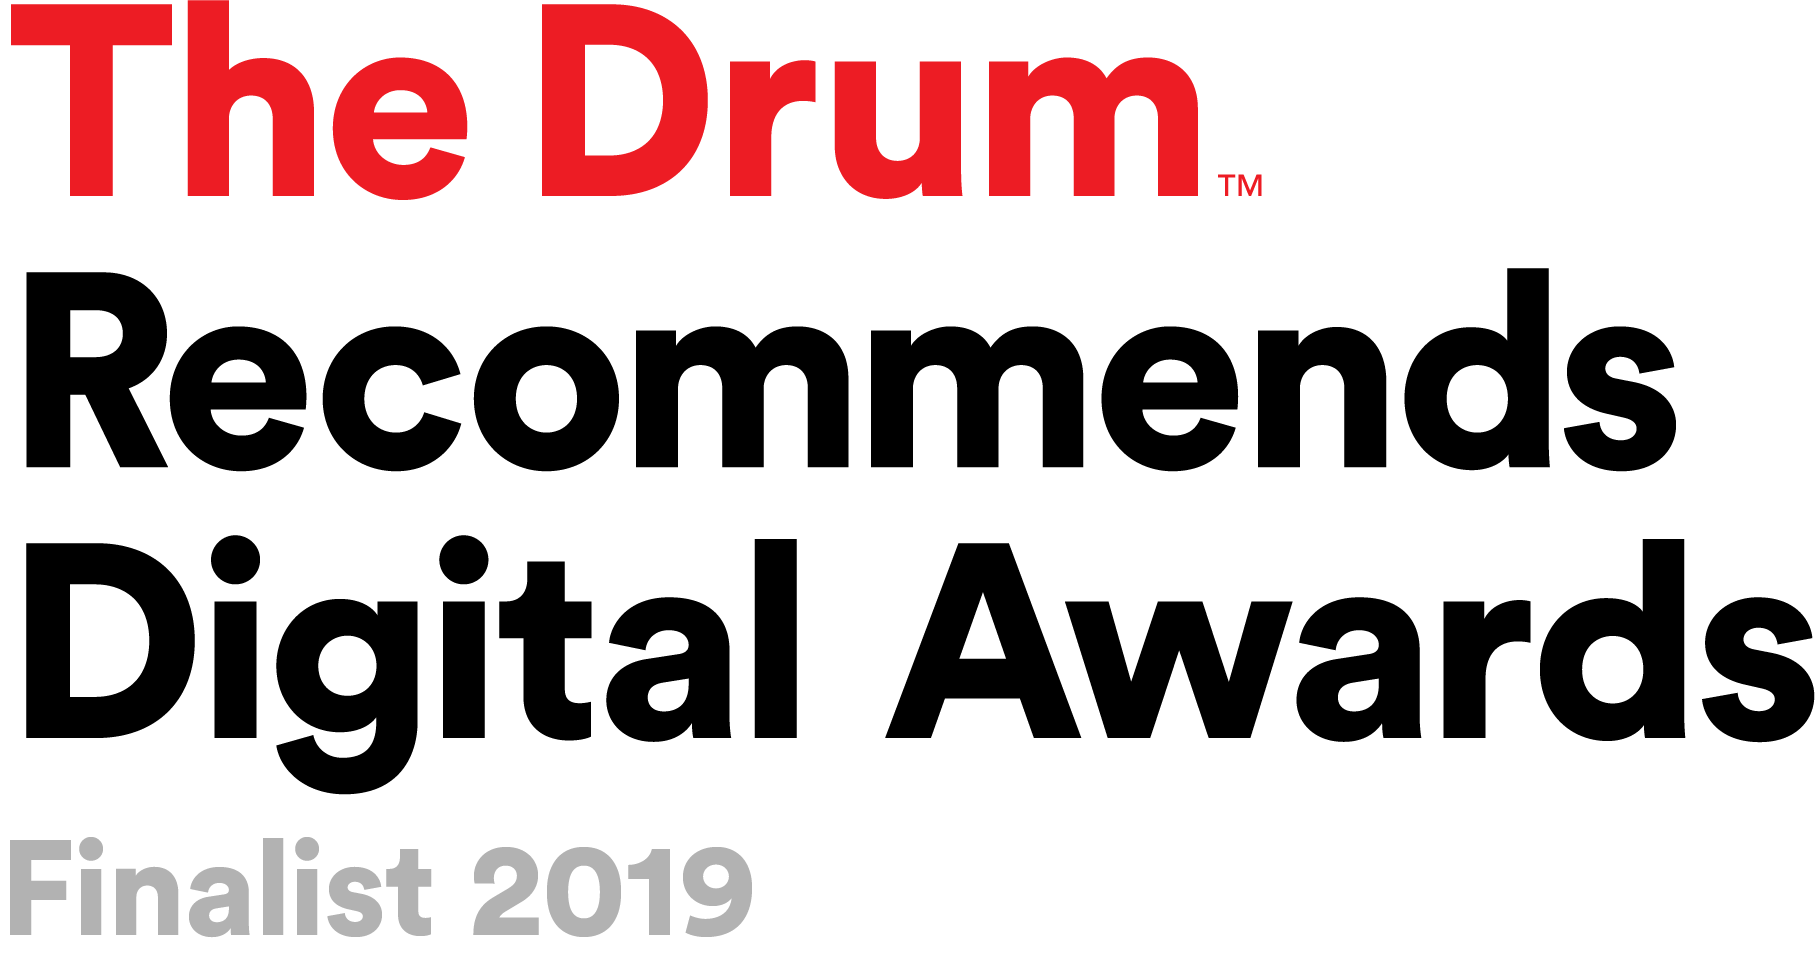 The Drum Recommends Digital Awards logo